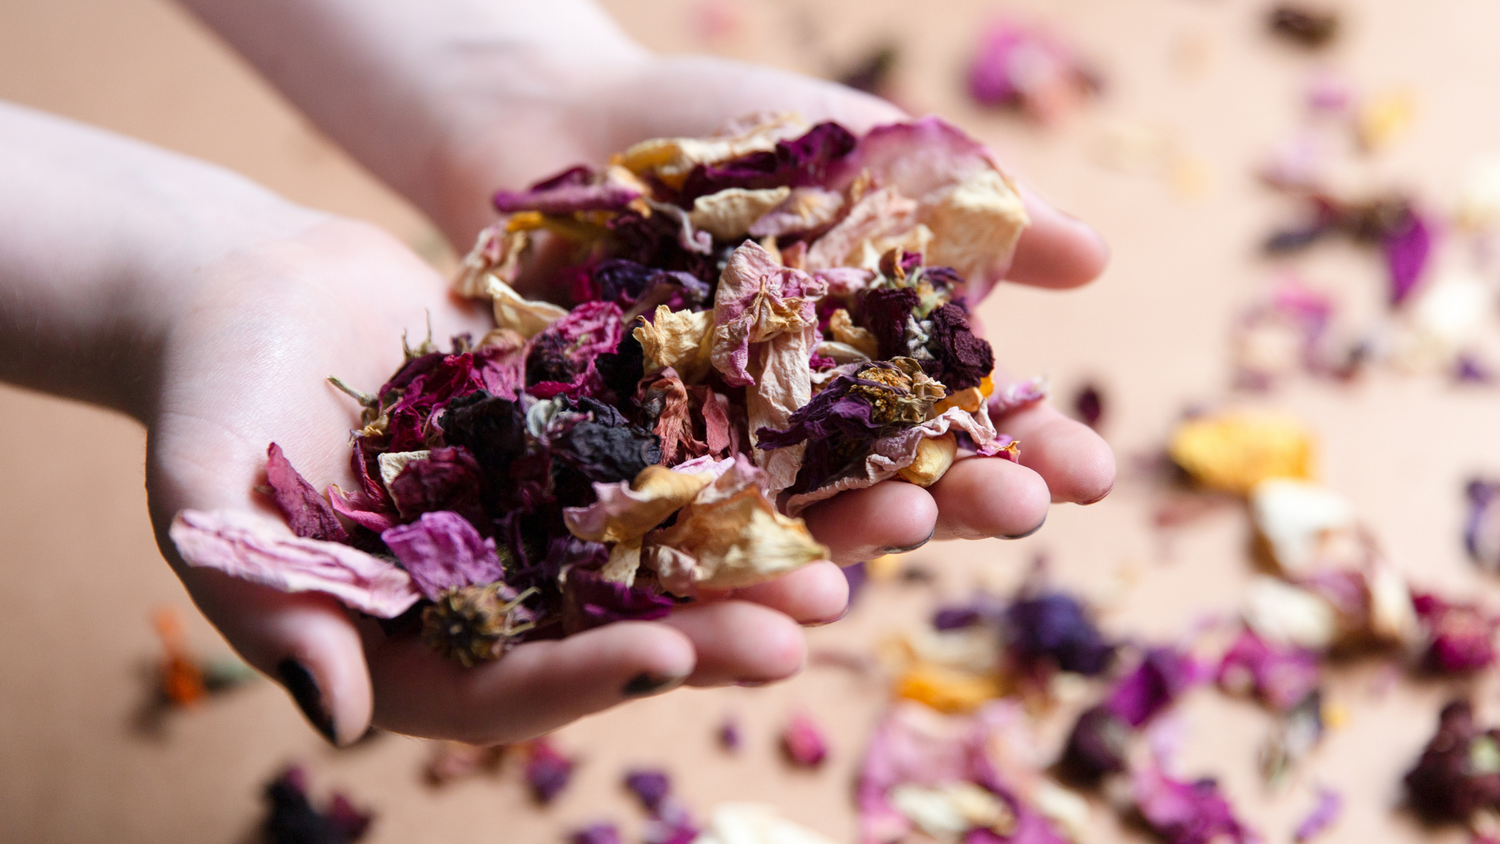 Fawn lily Botanica | hands holding dried flowers and botanicals, organic pure and natural bath and body skincare